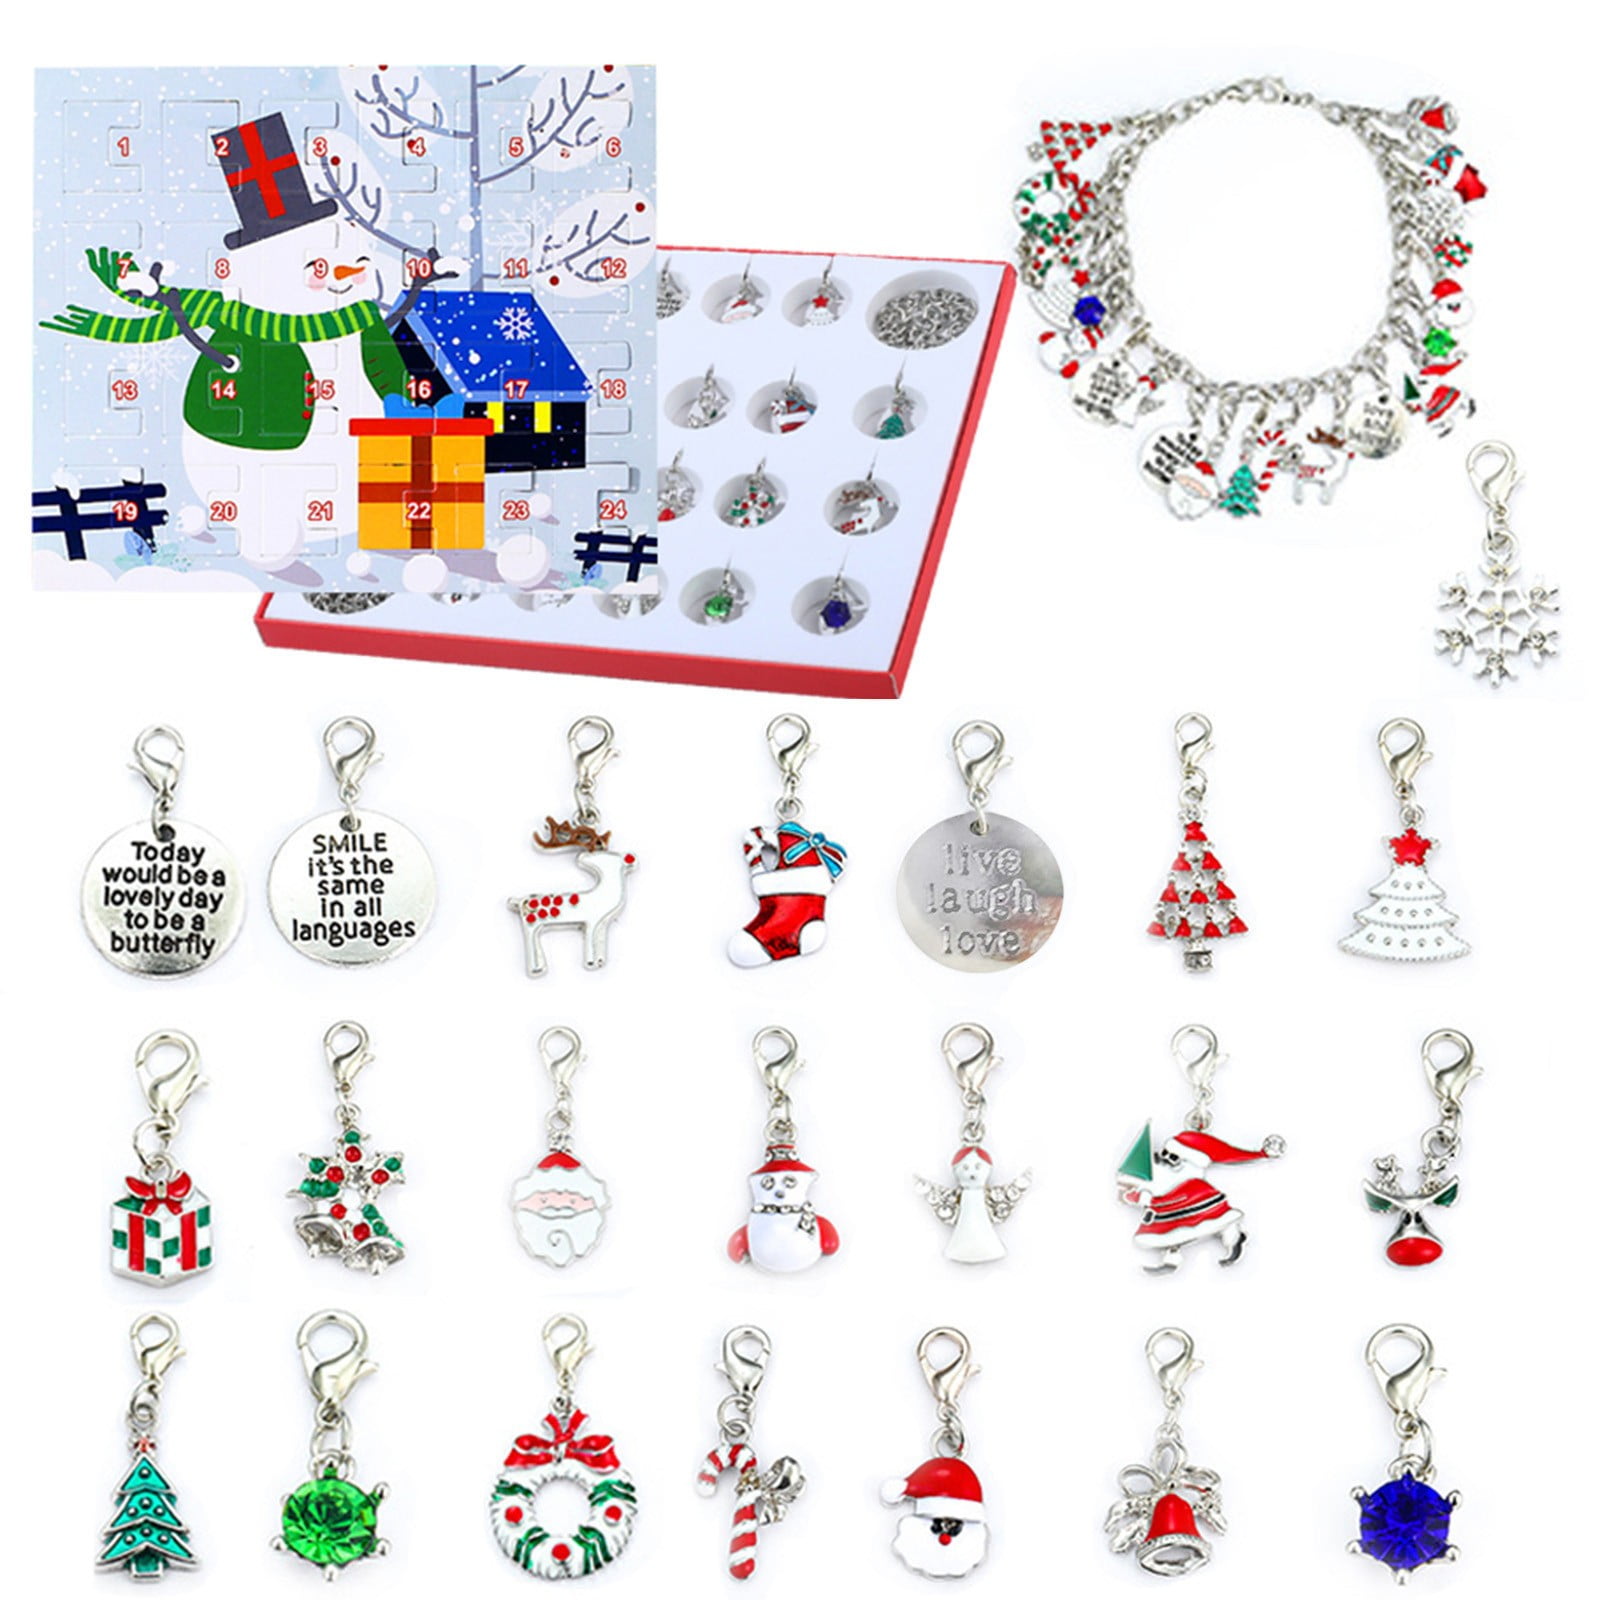 Details about   Advent Countdown Calendar Christmas Themed DIY Charm Bracelet Jewelry Gift Set 